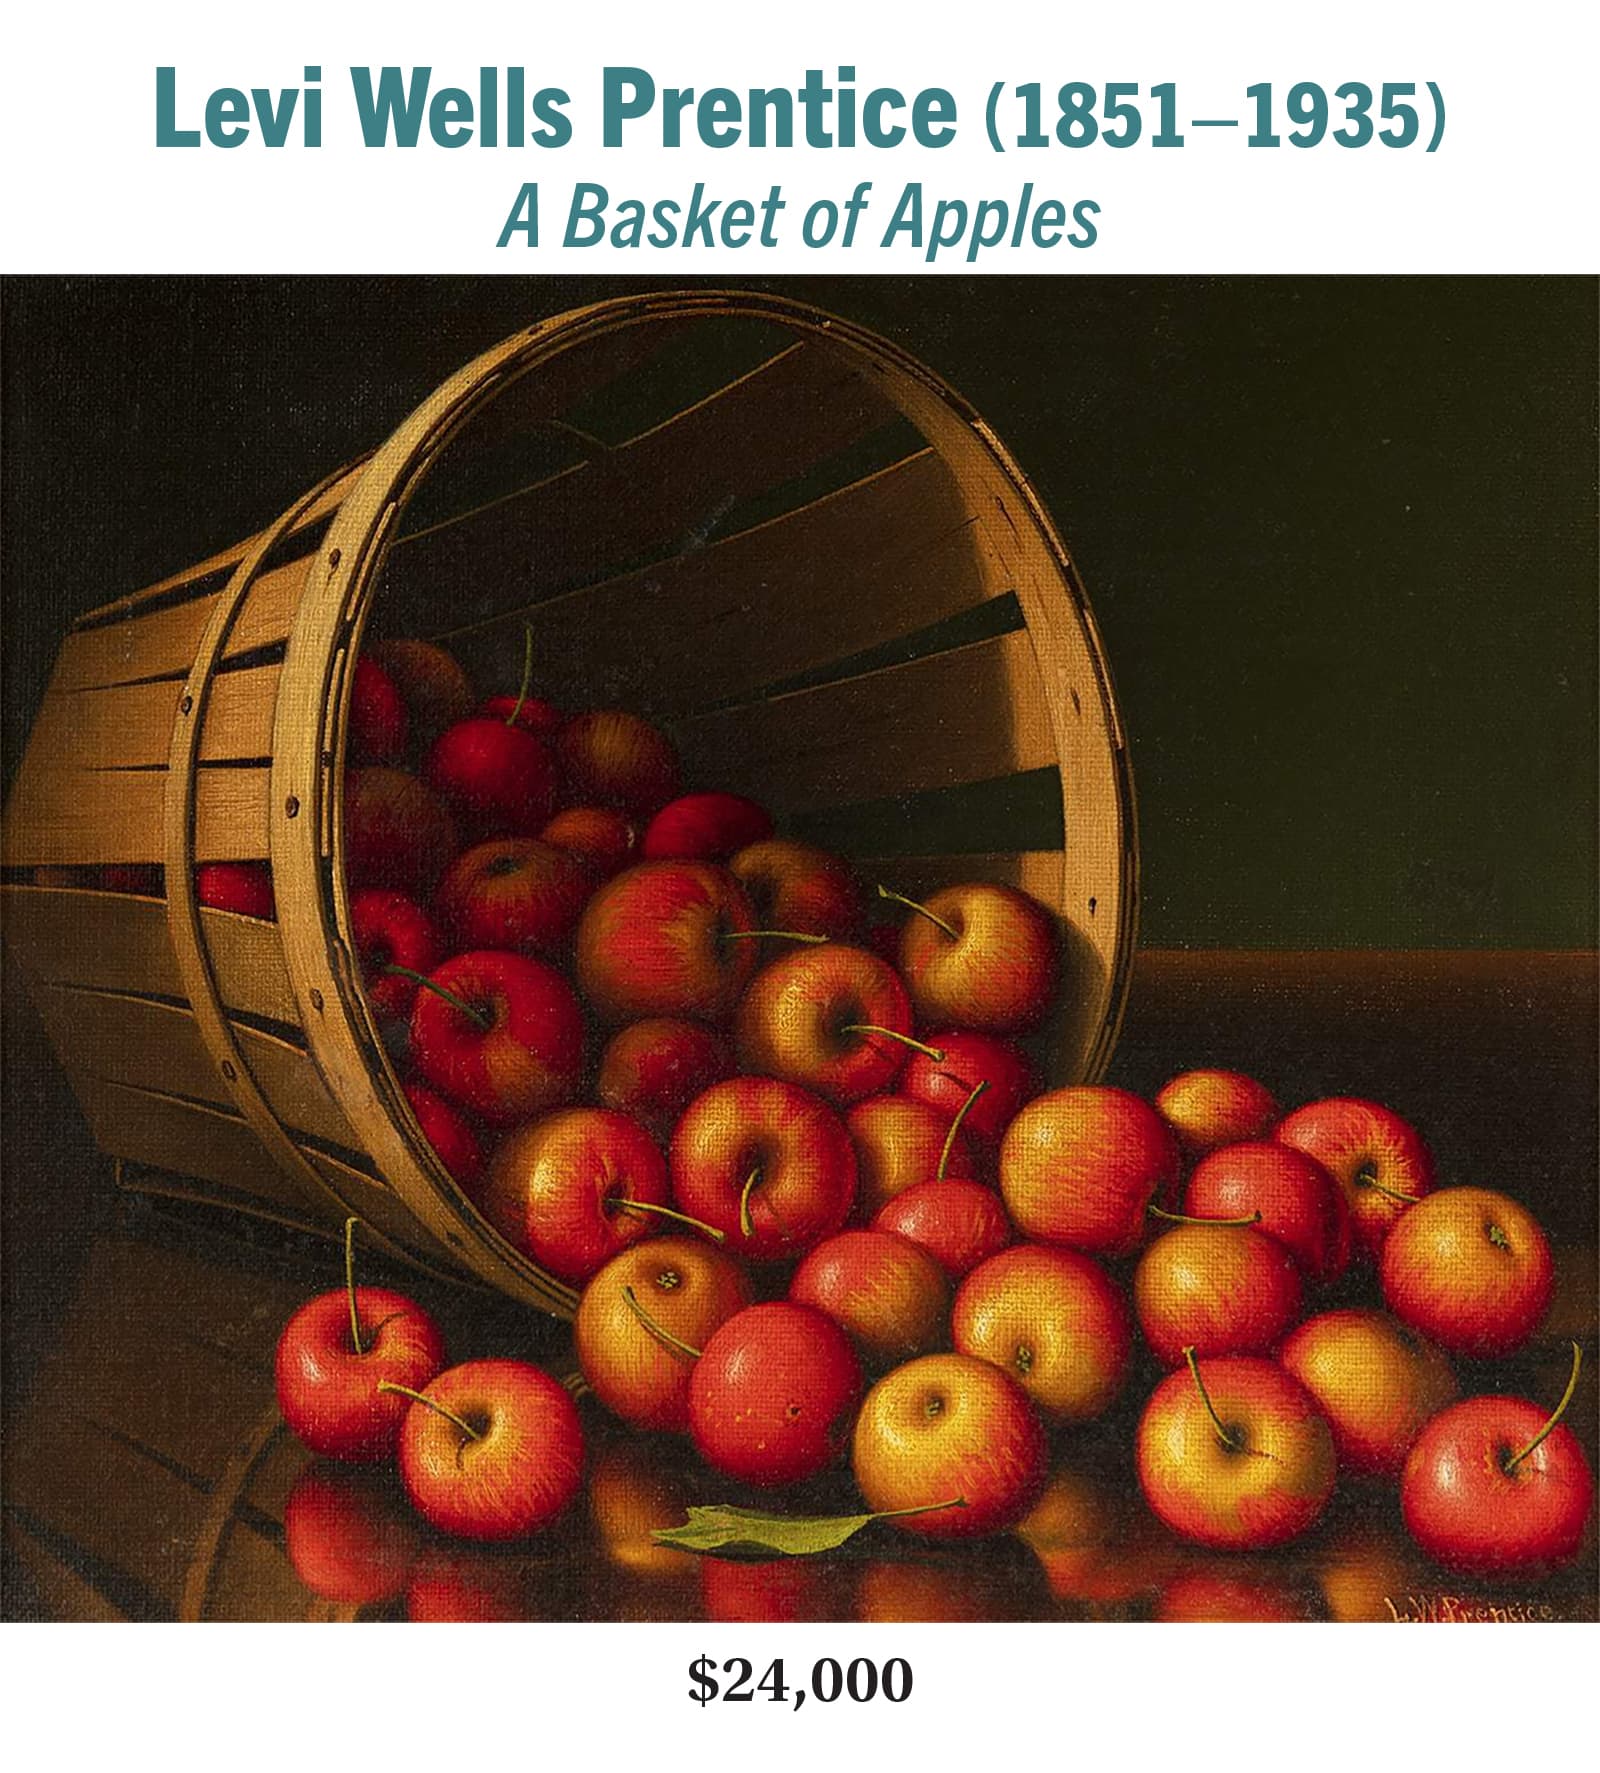 Levi Wells Prentice 18511935 A Basket of Apples oil on canvas American still life painting